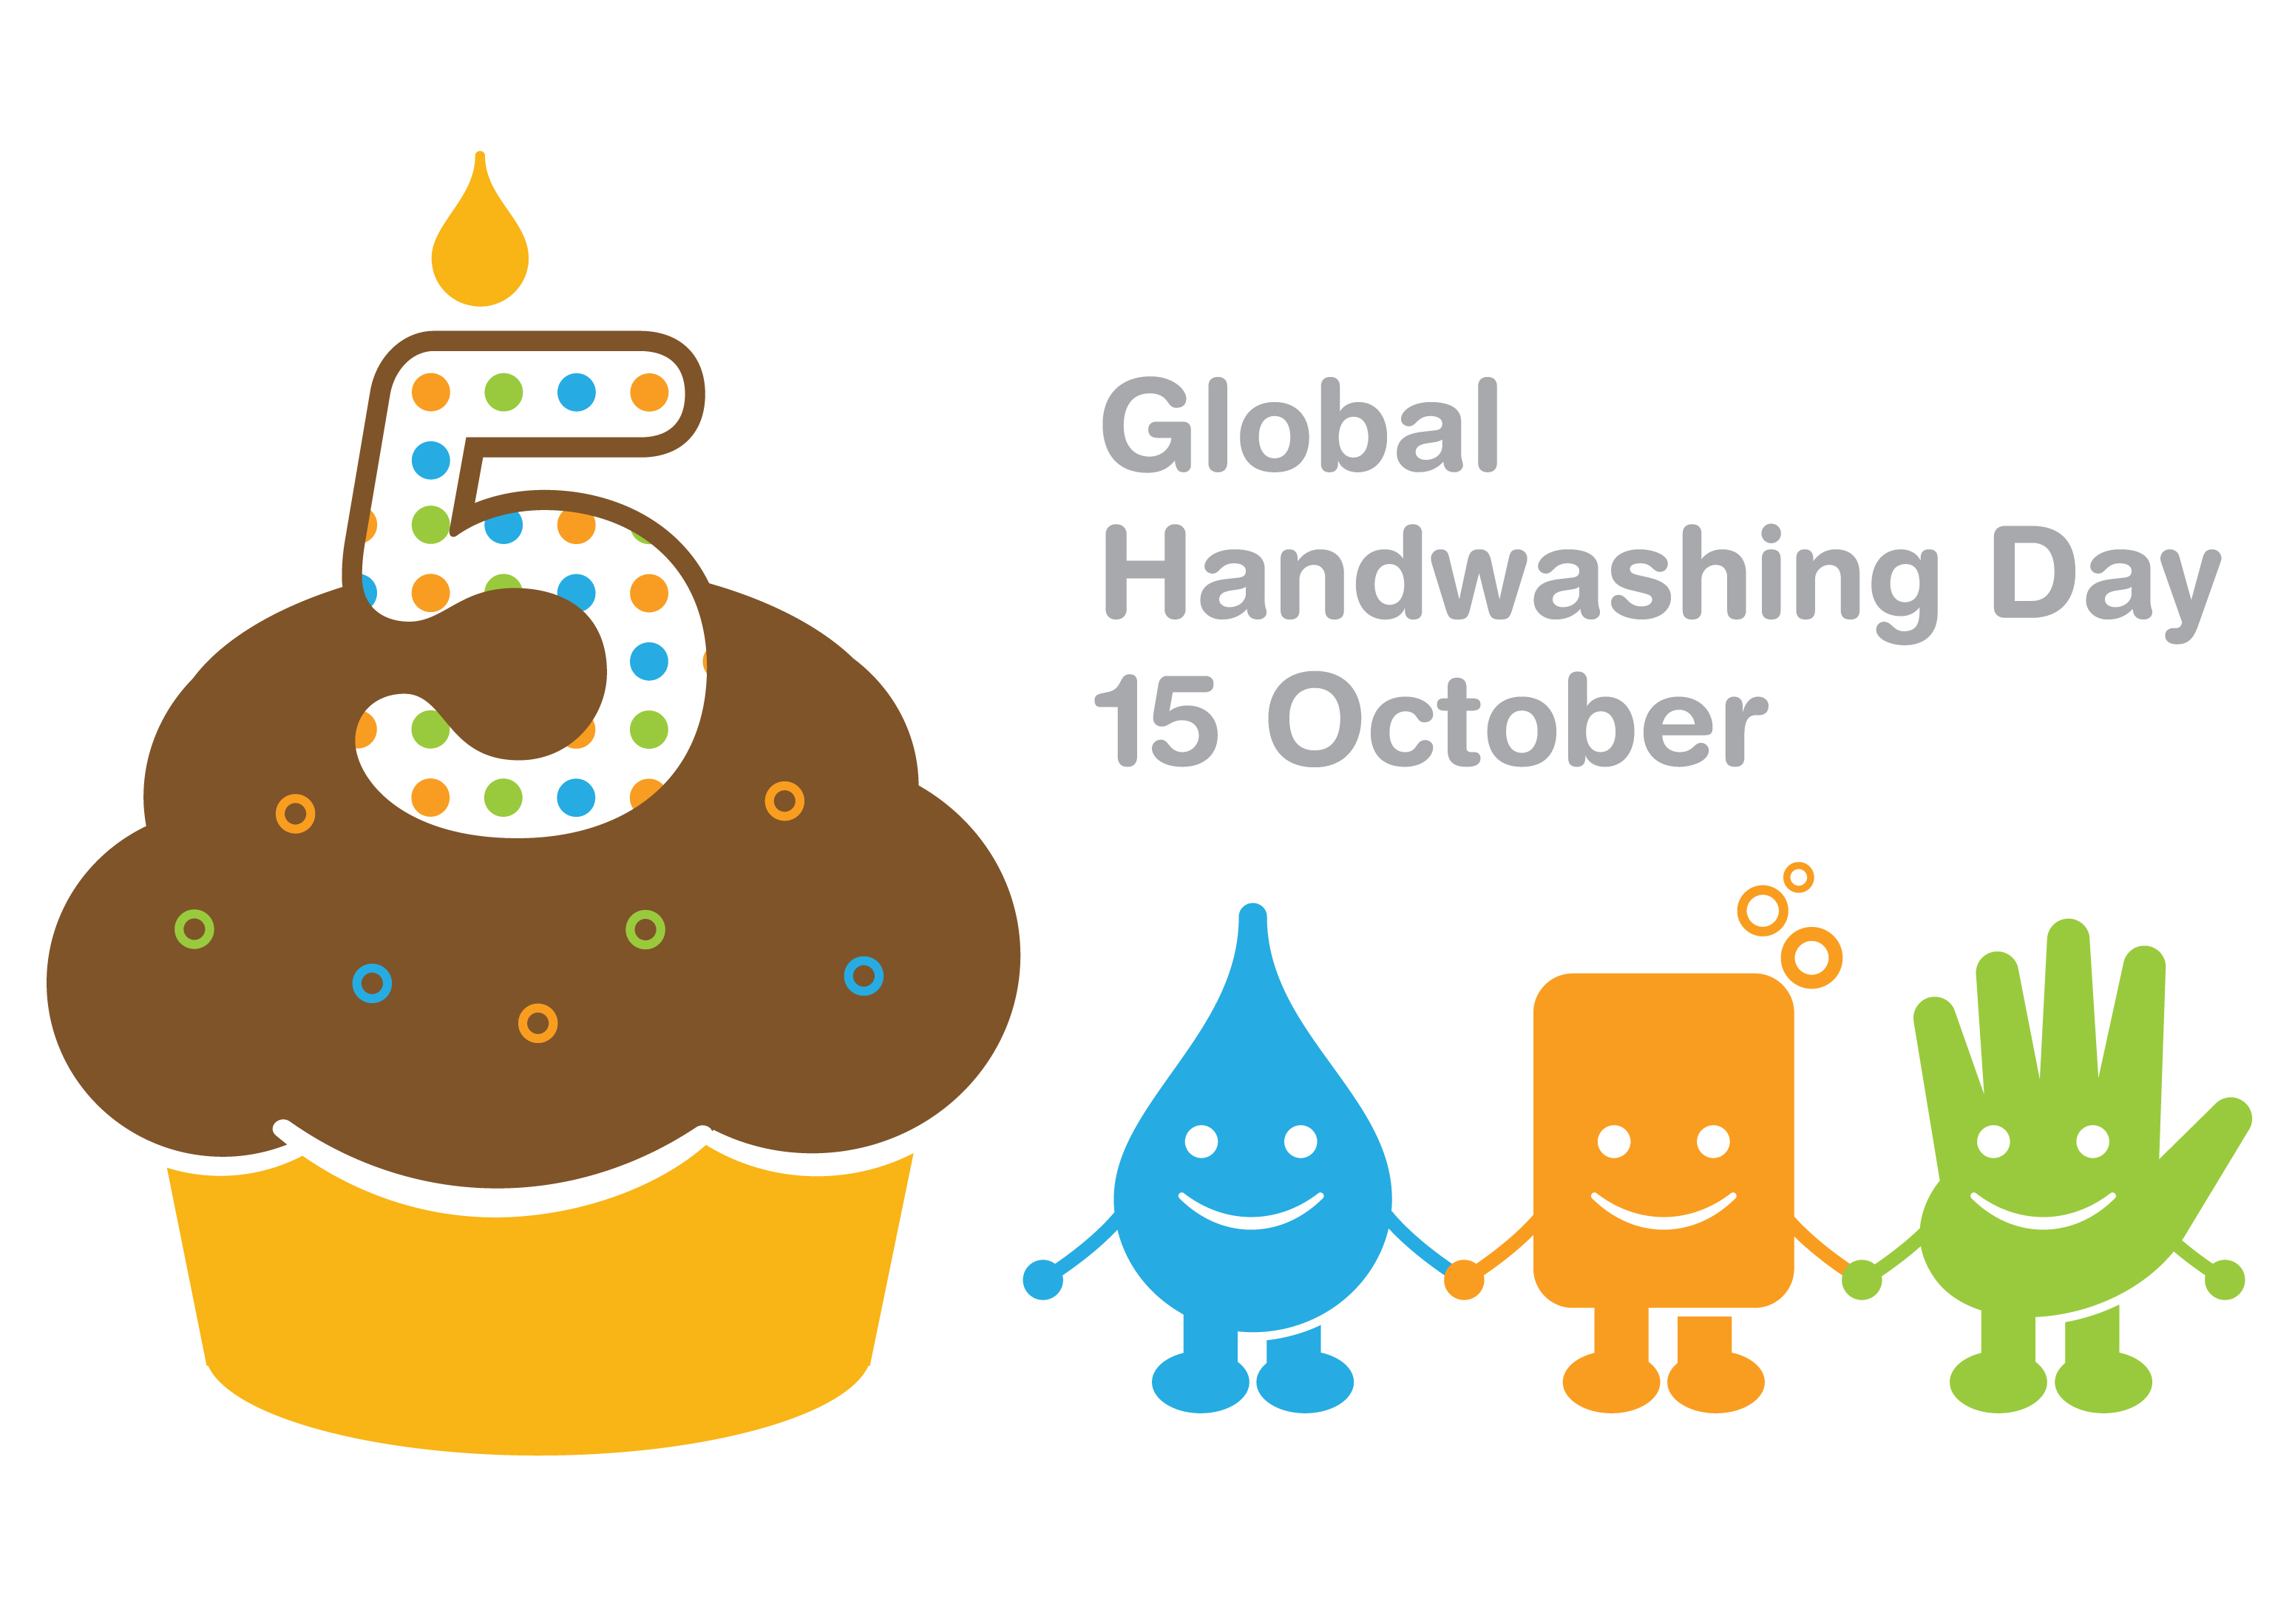 Today is Global Hand Washing Day